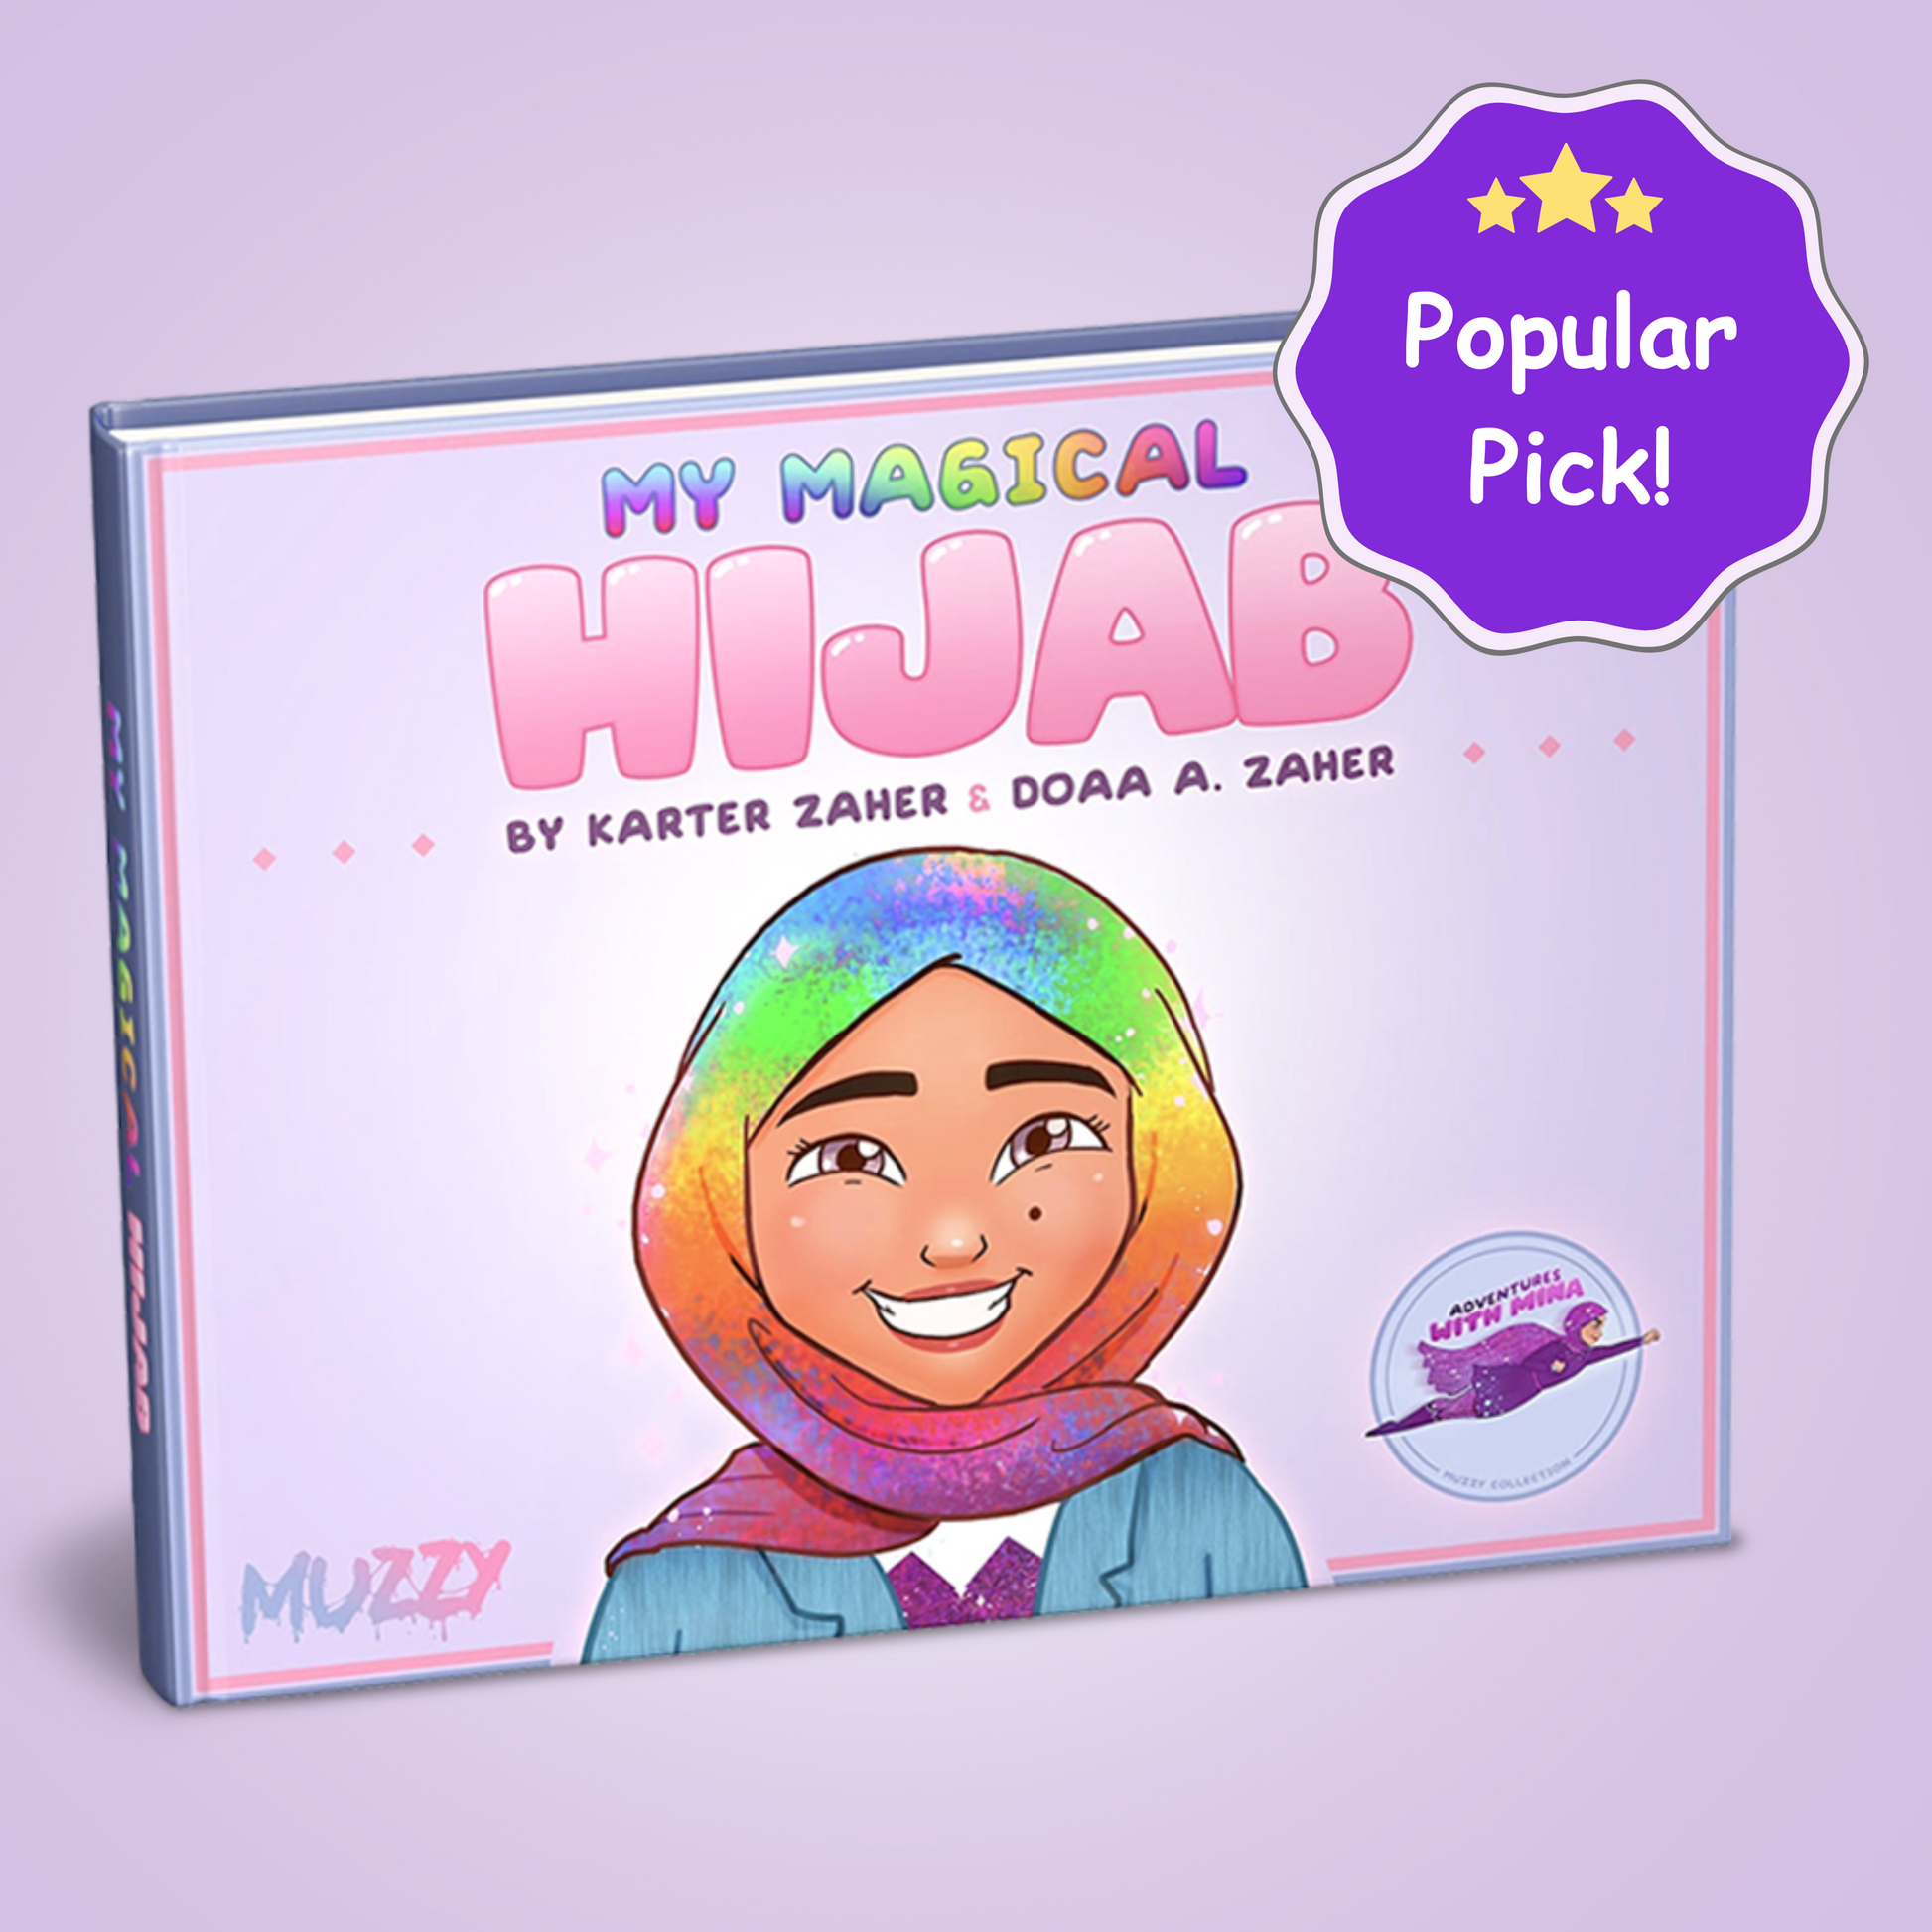 My Magical Hijab (Children's Book) ✨ - Muzzy